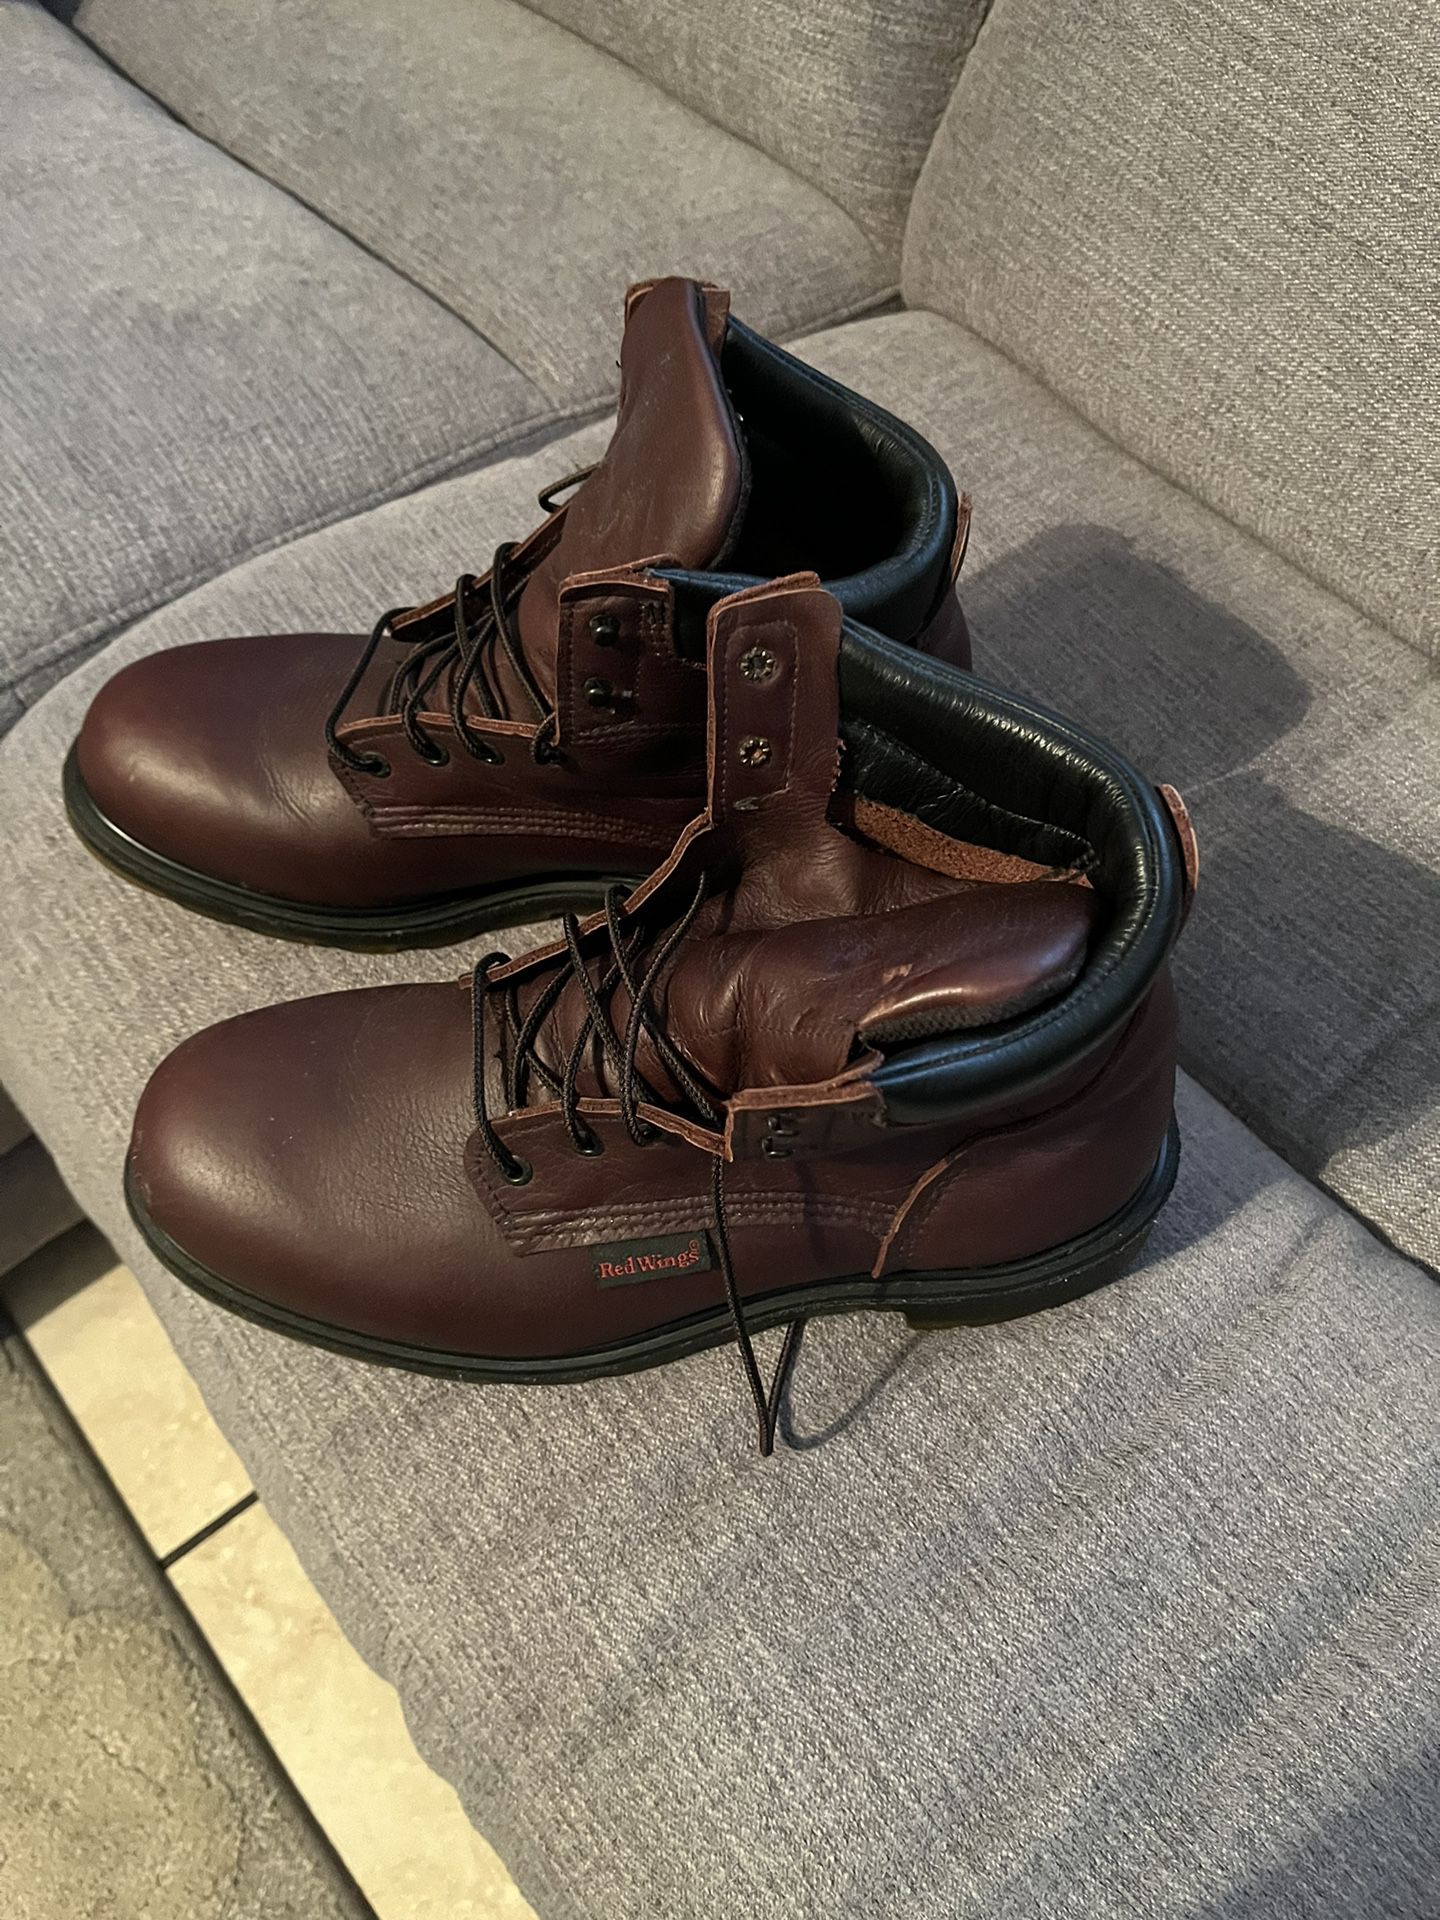 New Red Wing Boots